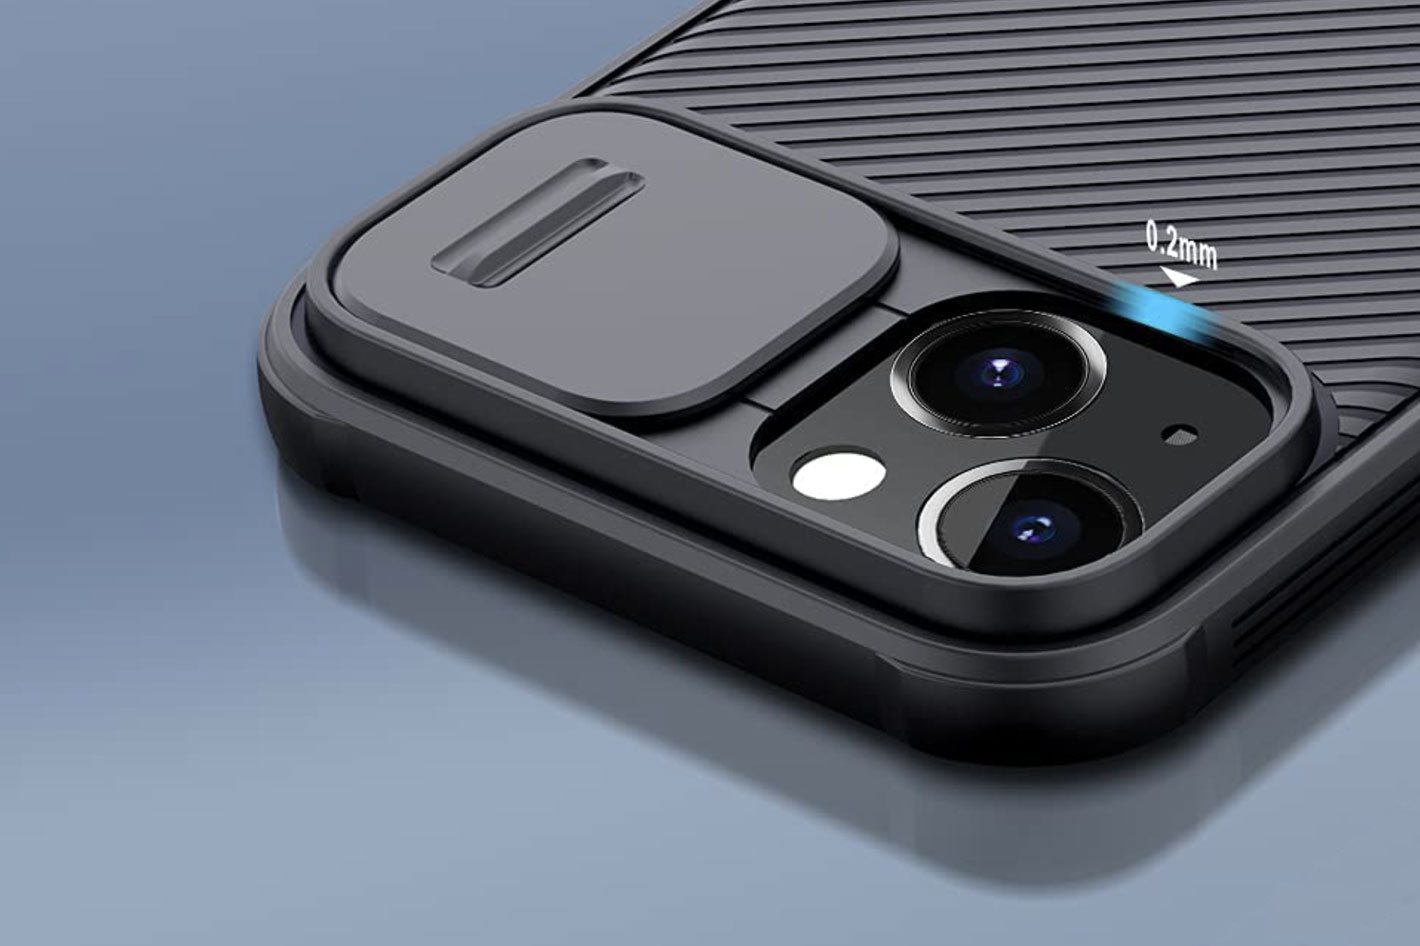 XTCase: how to protect your smartphone's camera lens